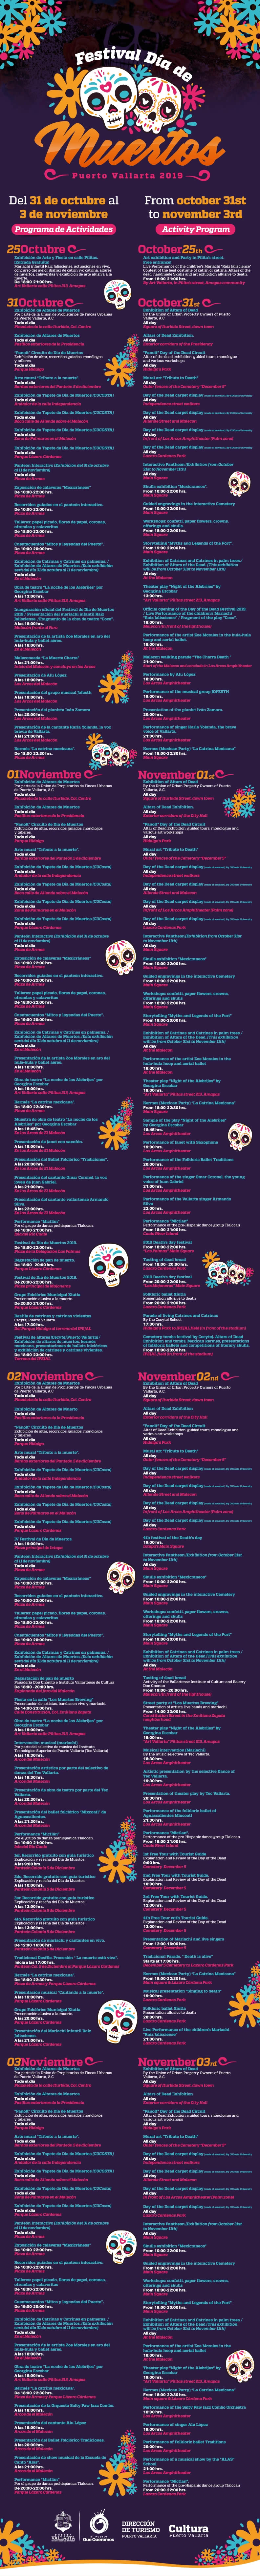 Day of the Dead Festival 2019 schedule